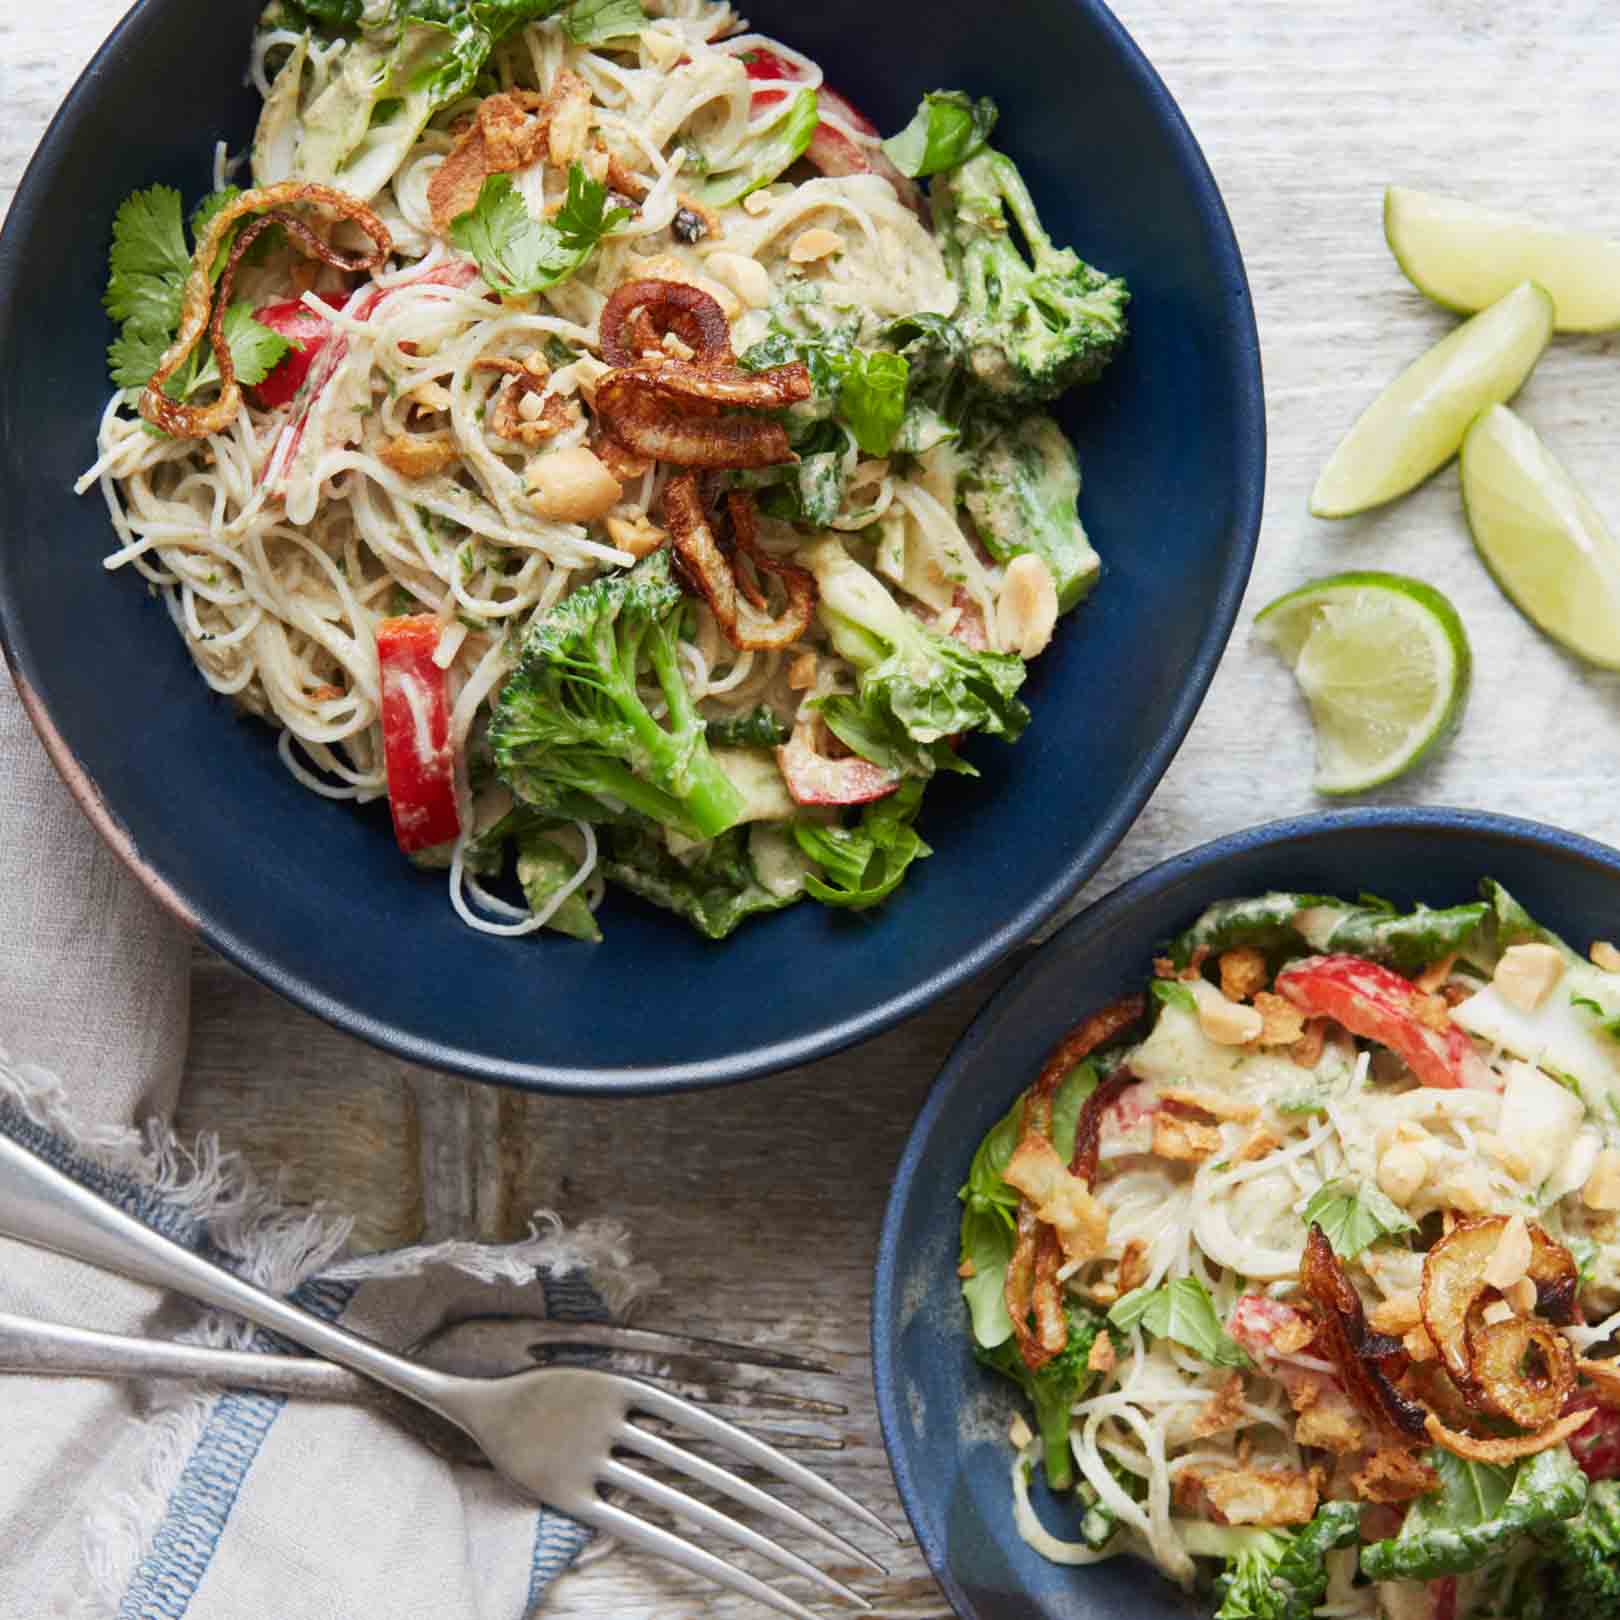 Stir-Fried Thai Green Rice Noodles with Vegetables